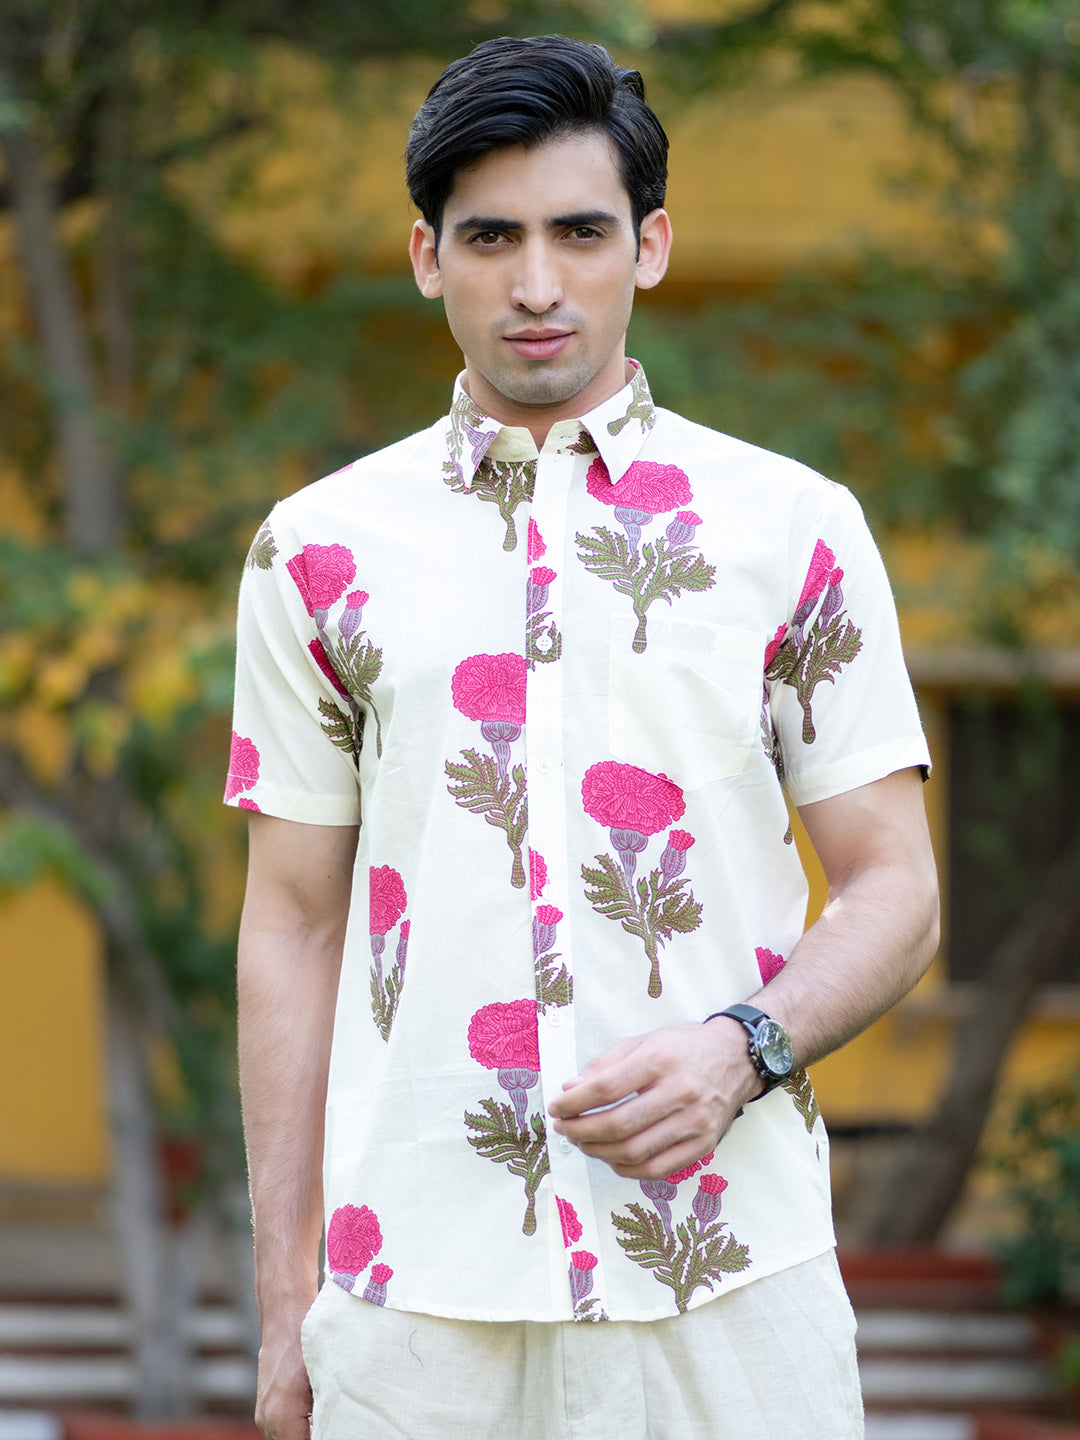 Buy Off-white Florescence Printed Cotton Half Shirt Online